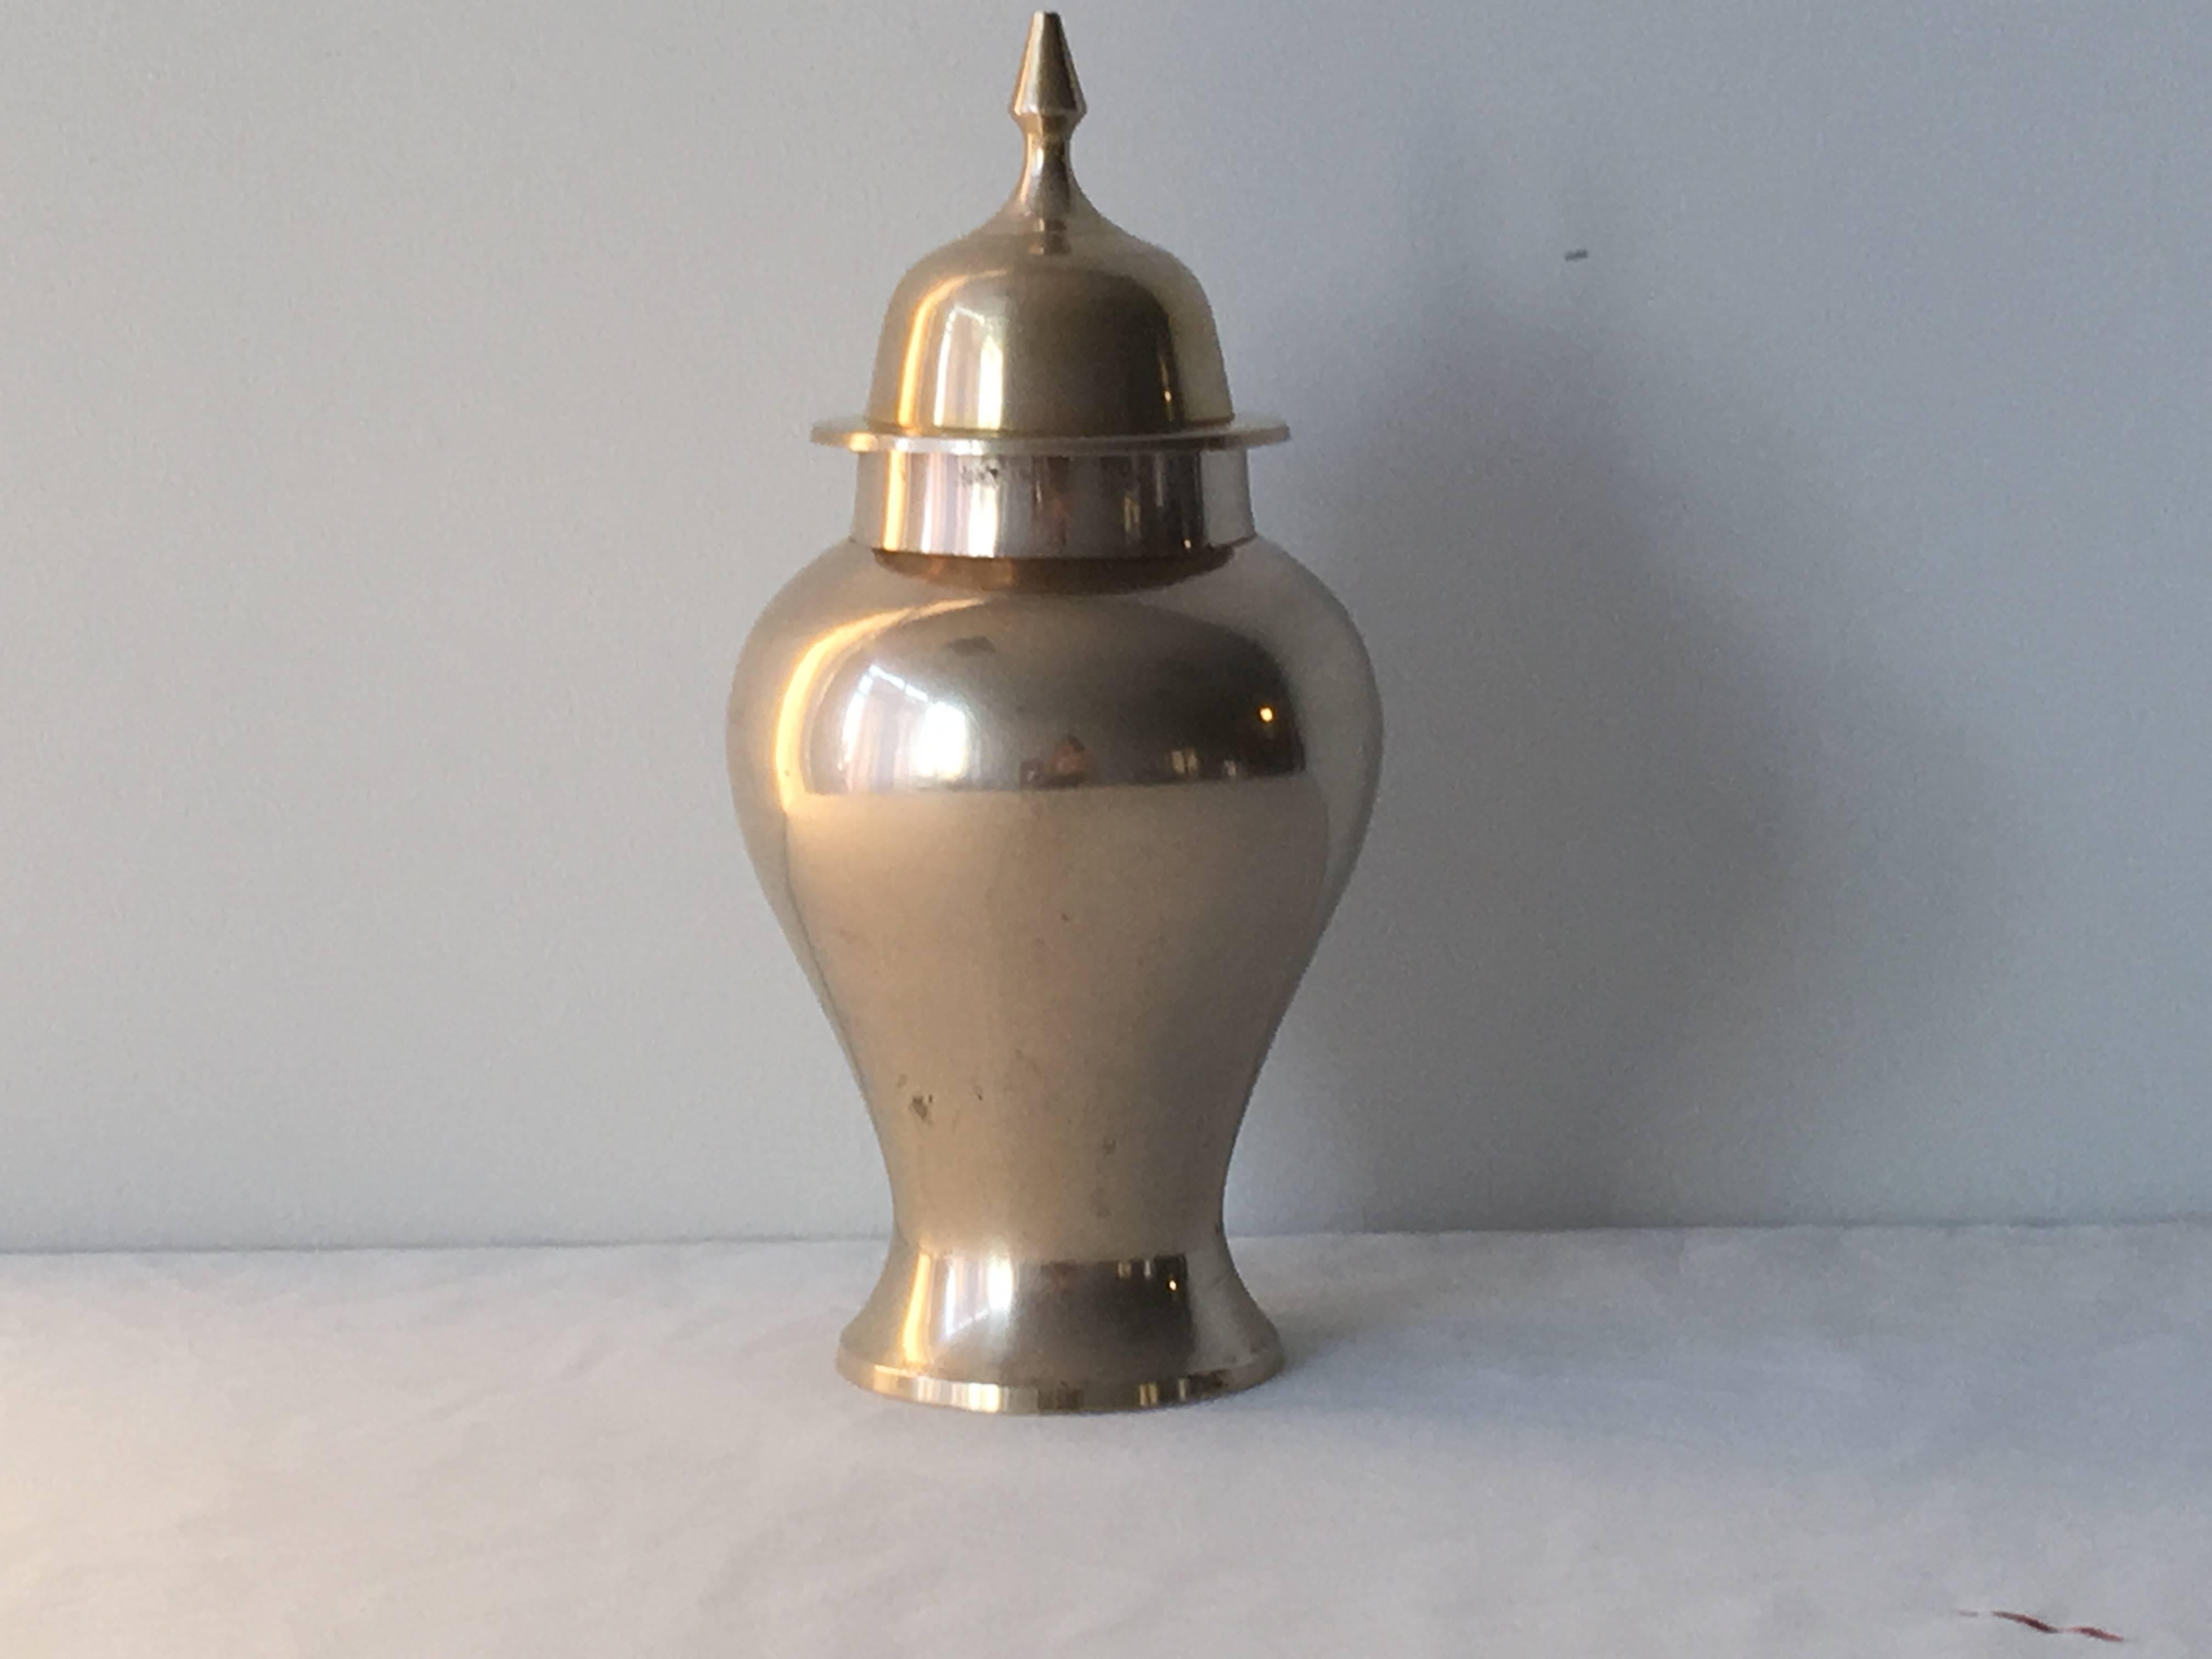 Offered is a beautiful, 1970s polished brass ginger jar urn.